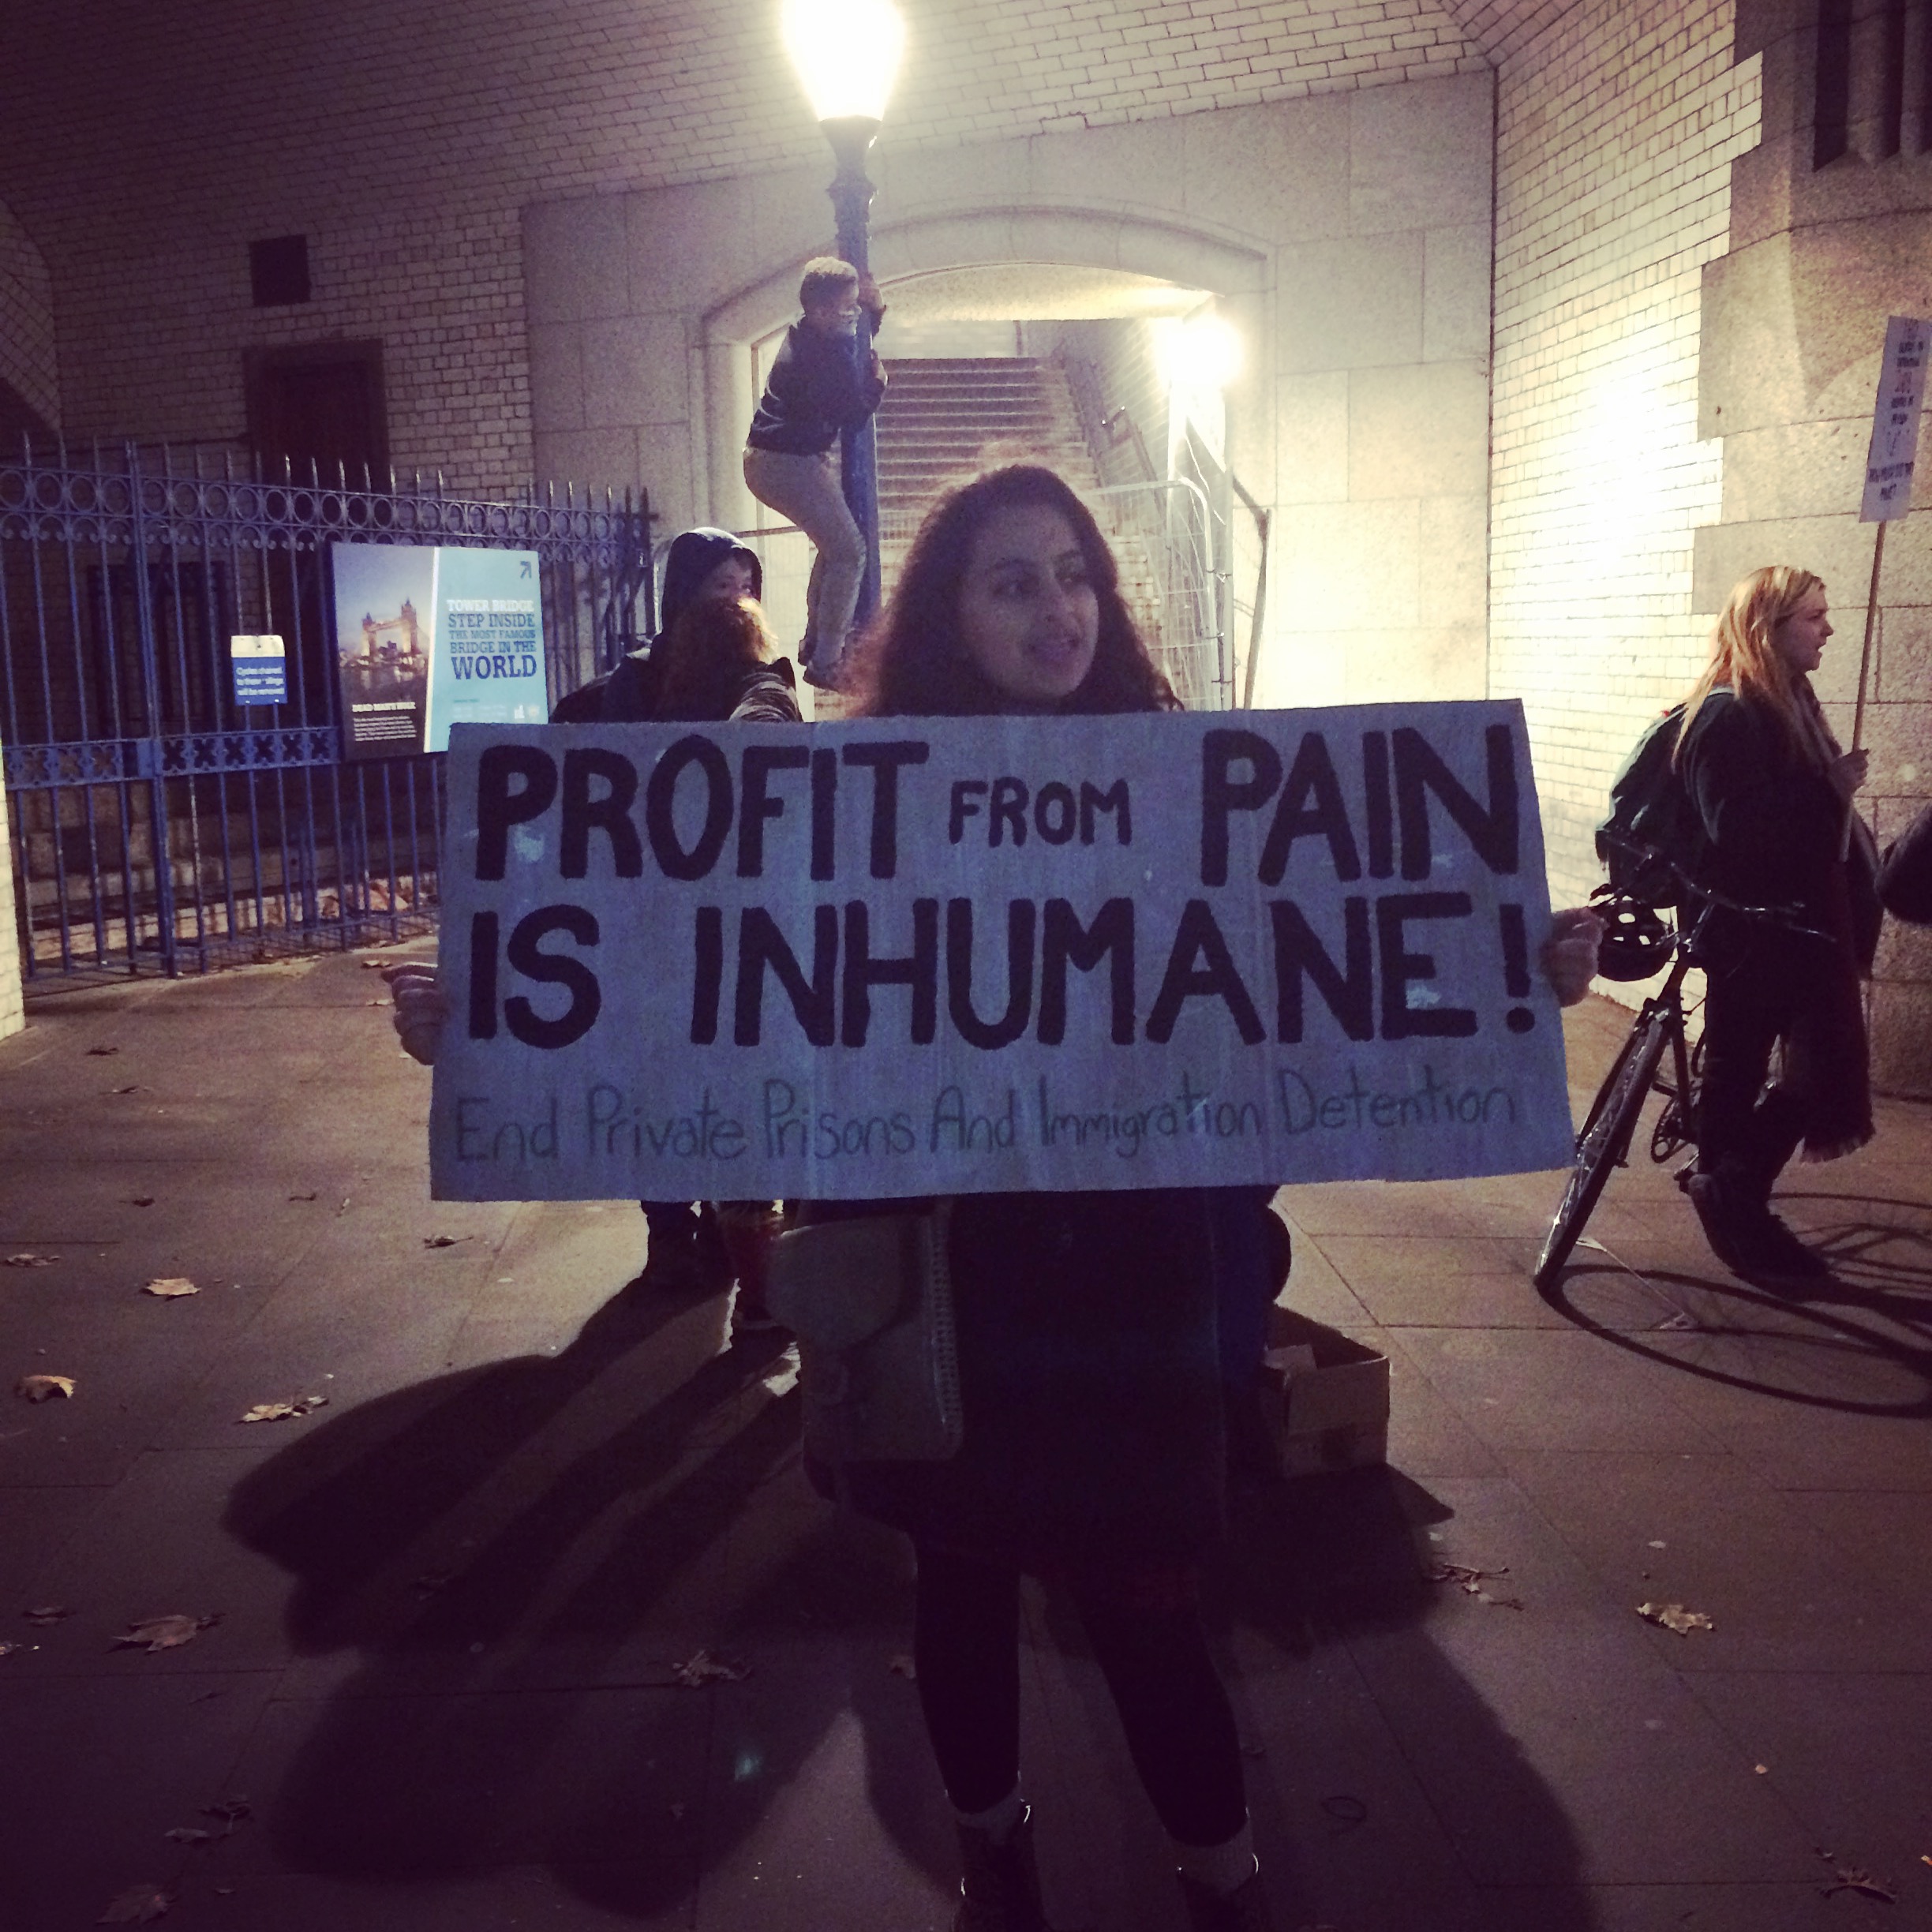 "Profit from pain is inhumane" protesting at the Detention and Security Summit